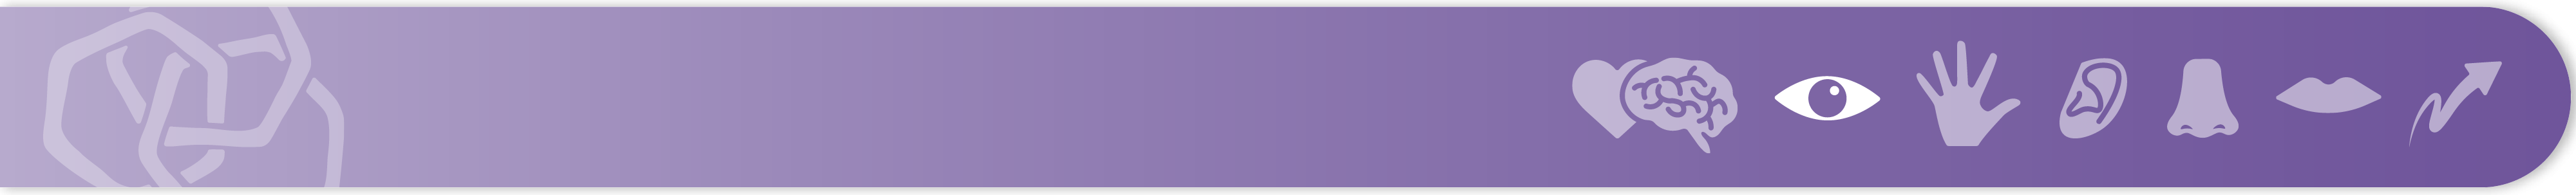 Section banner indicating the start of a new section. On the right, 7 icons depict the senses: a heart and brain, an eye, a hand, an ear, a nost, a mouth, and an arrow (movement). Chapter 3 banner is purple with the eye icon highlighted.